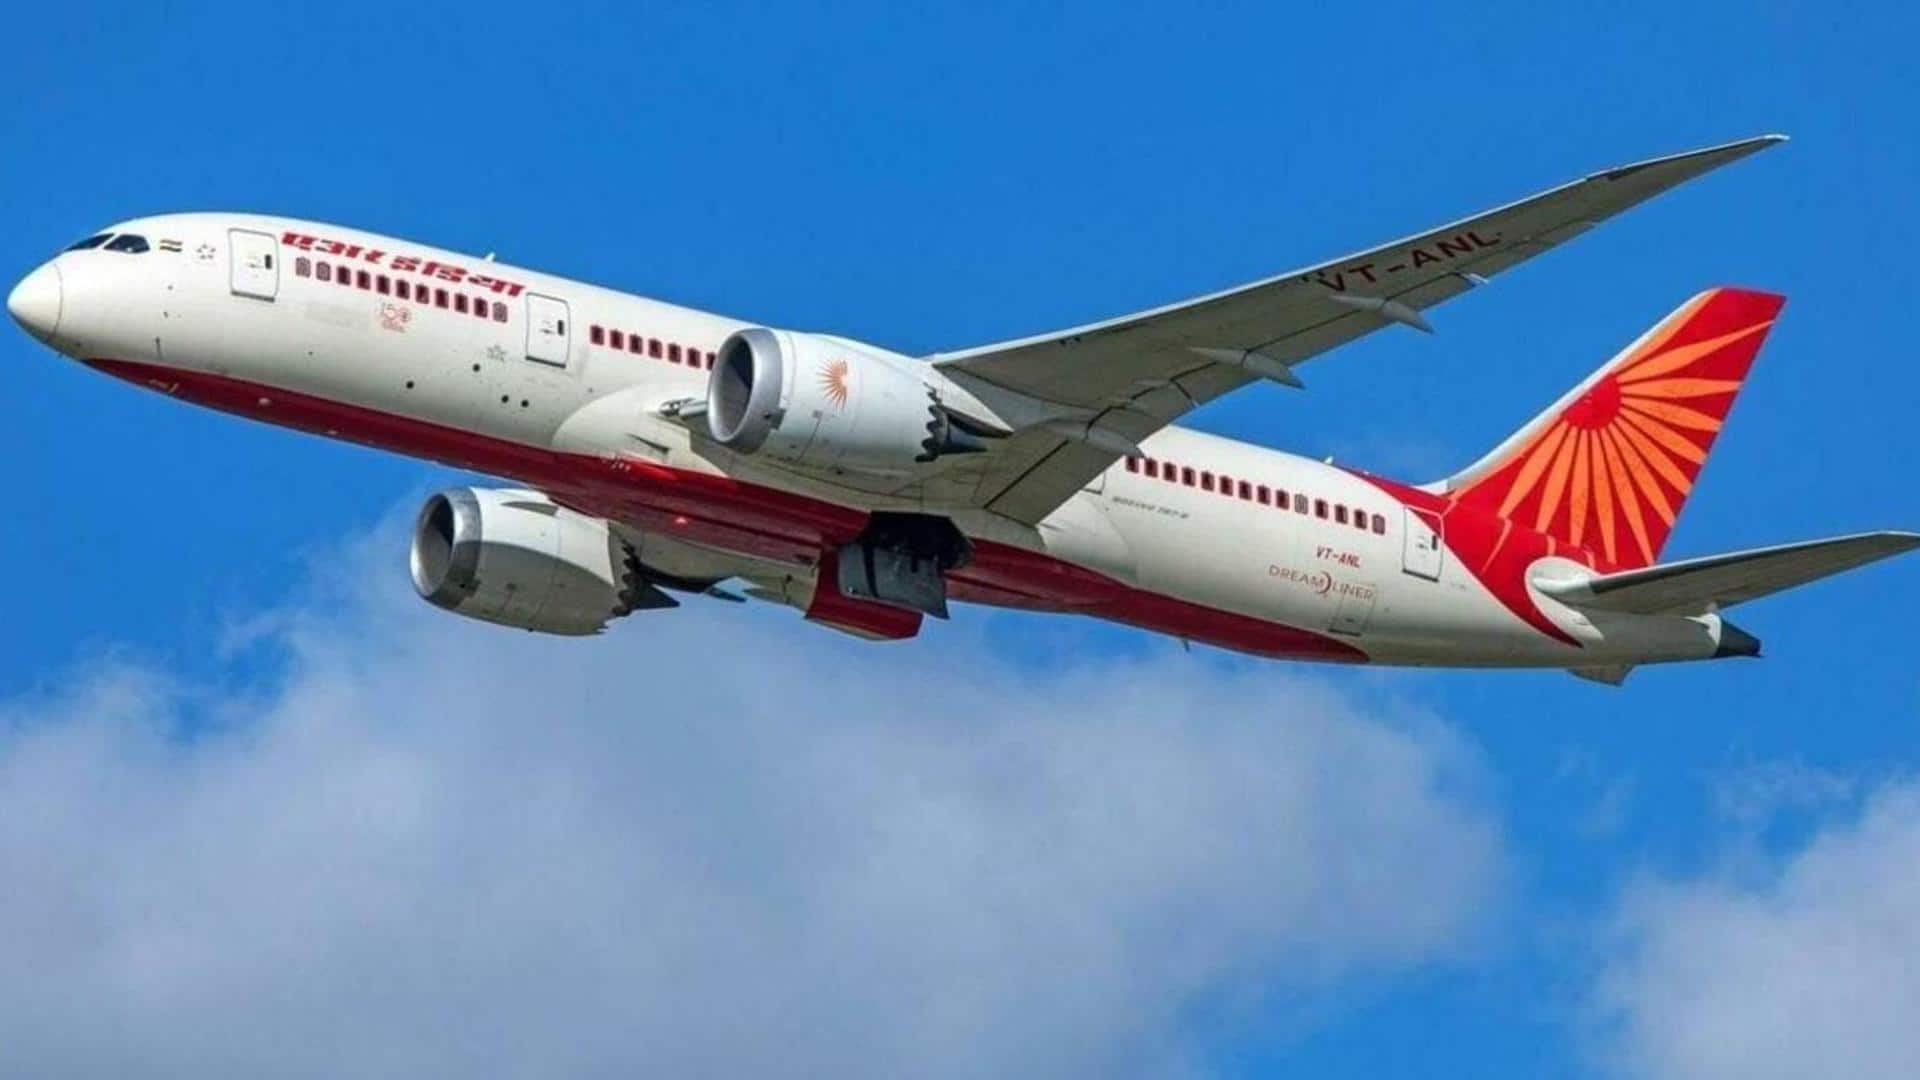 Medical emergency: Air India's New York-Delhi flight diverted to London